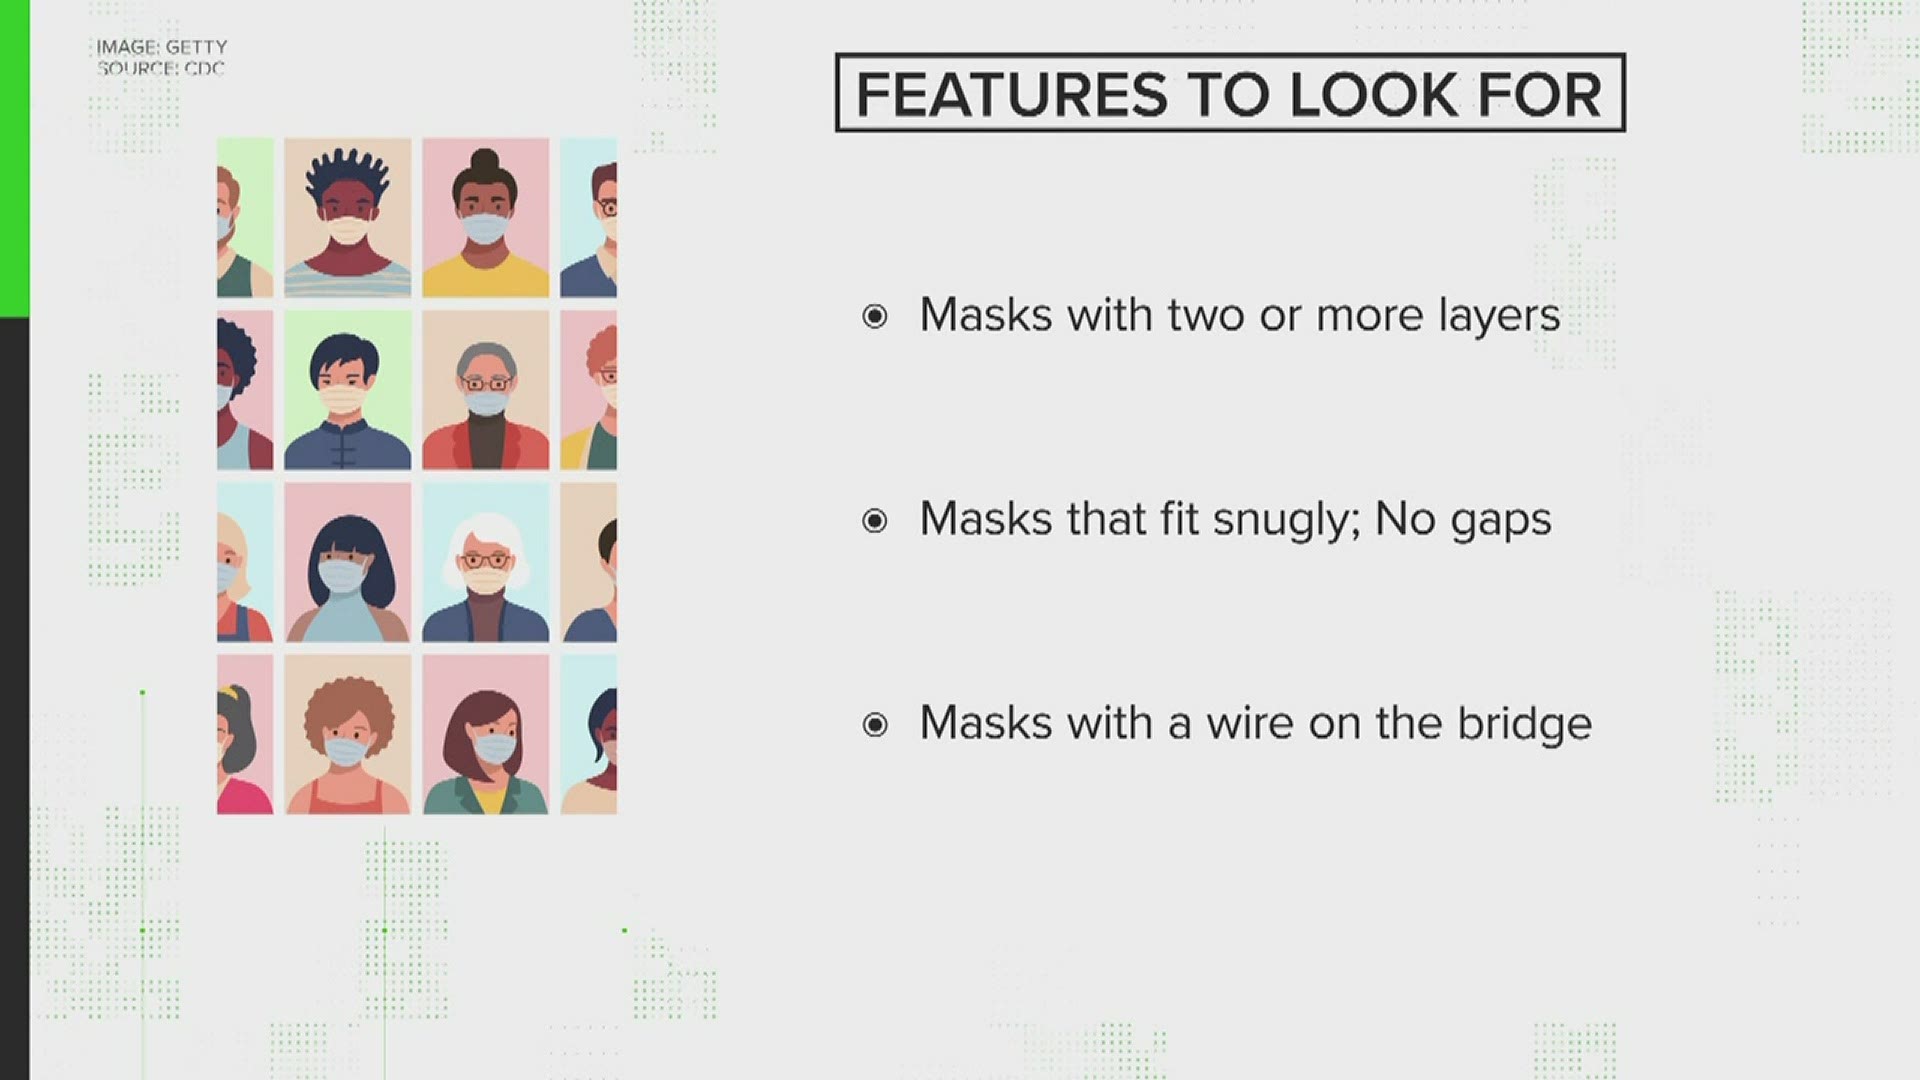 Not all masks are created equal. What do you need to look for in a mask?